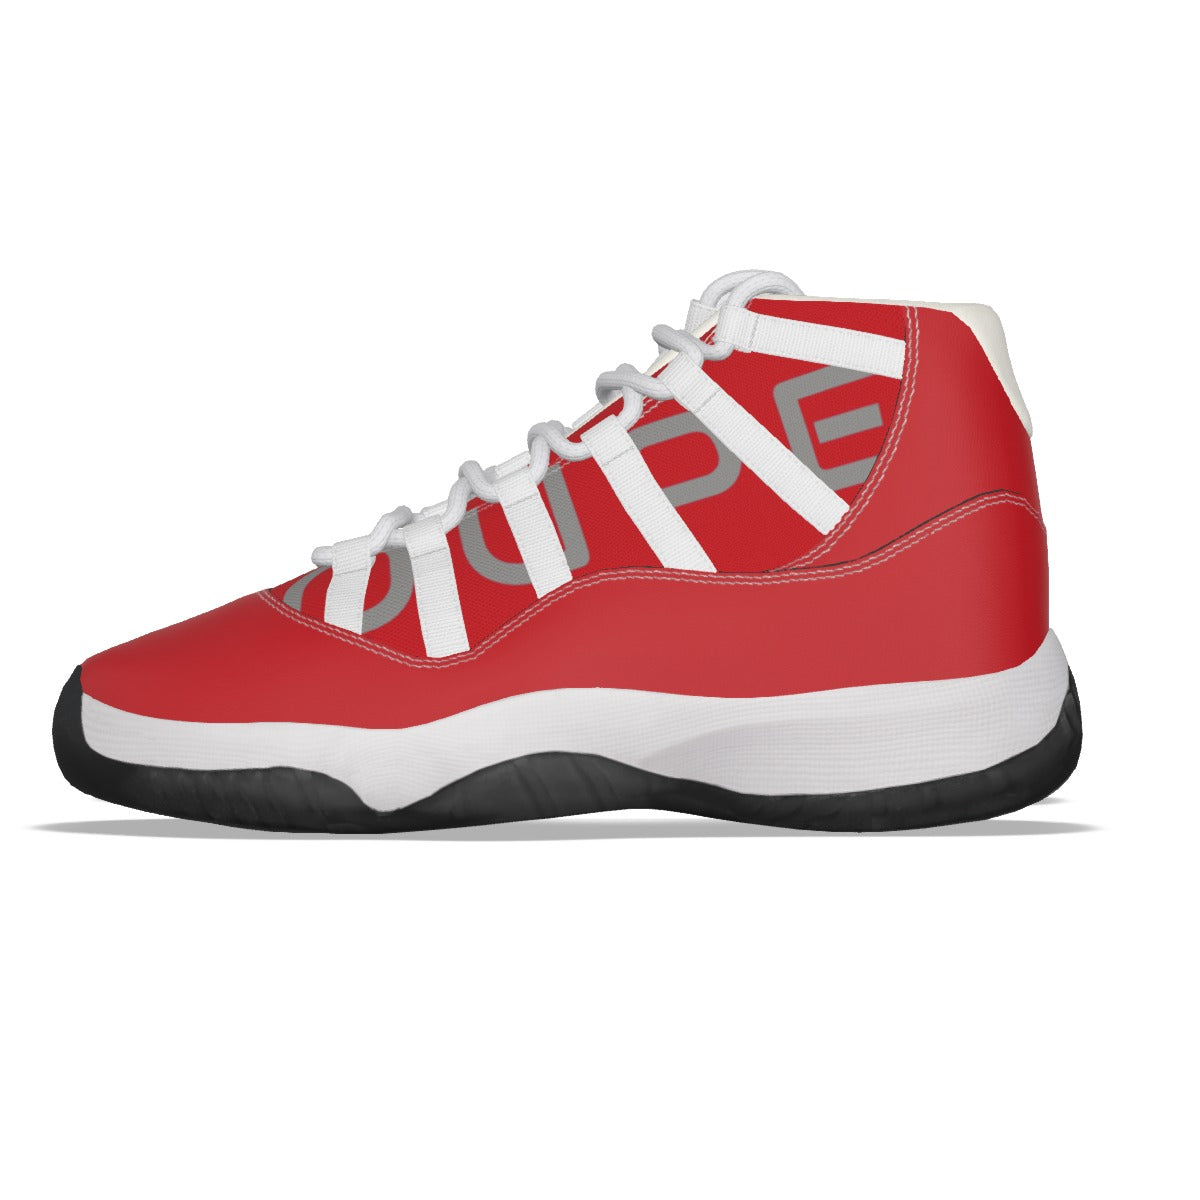 OUPE Men's High Top Basketball Shoes